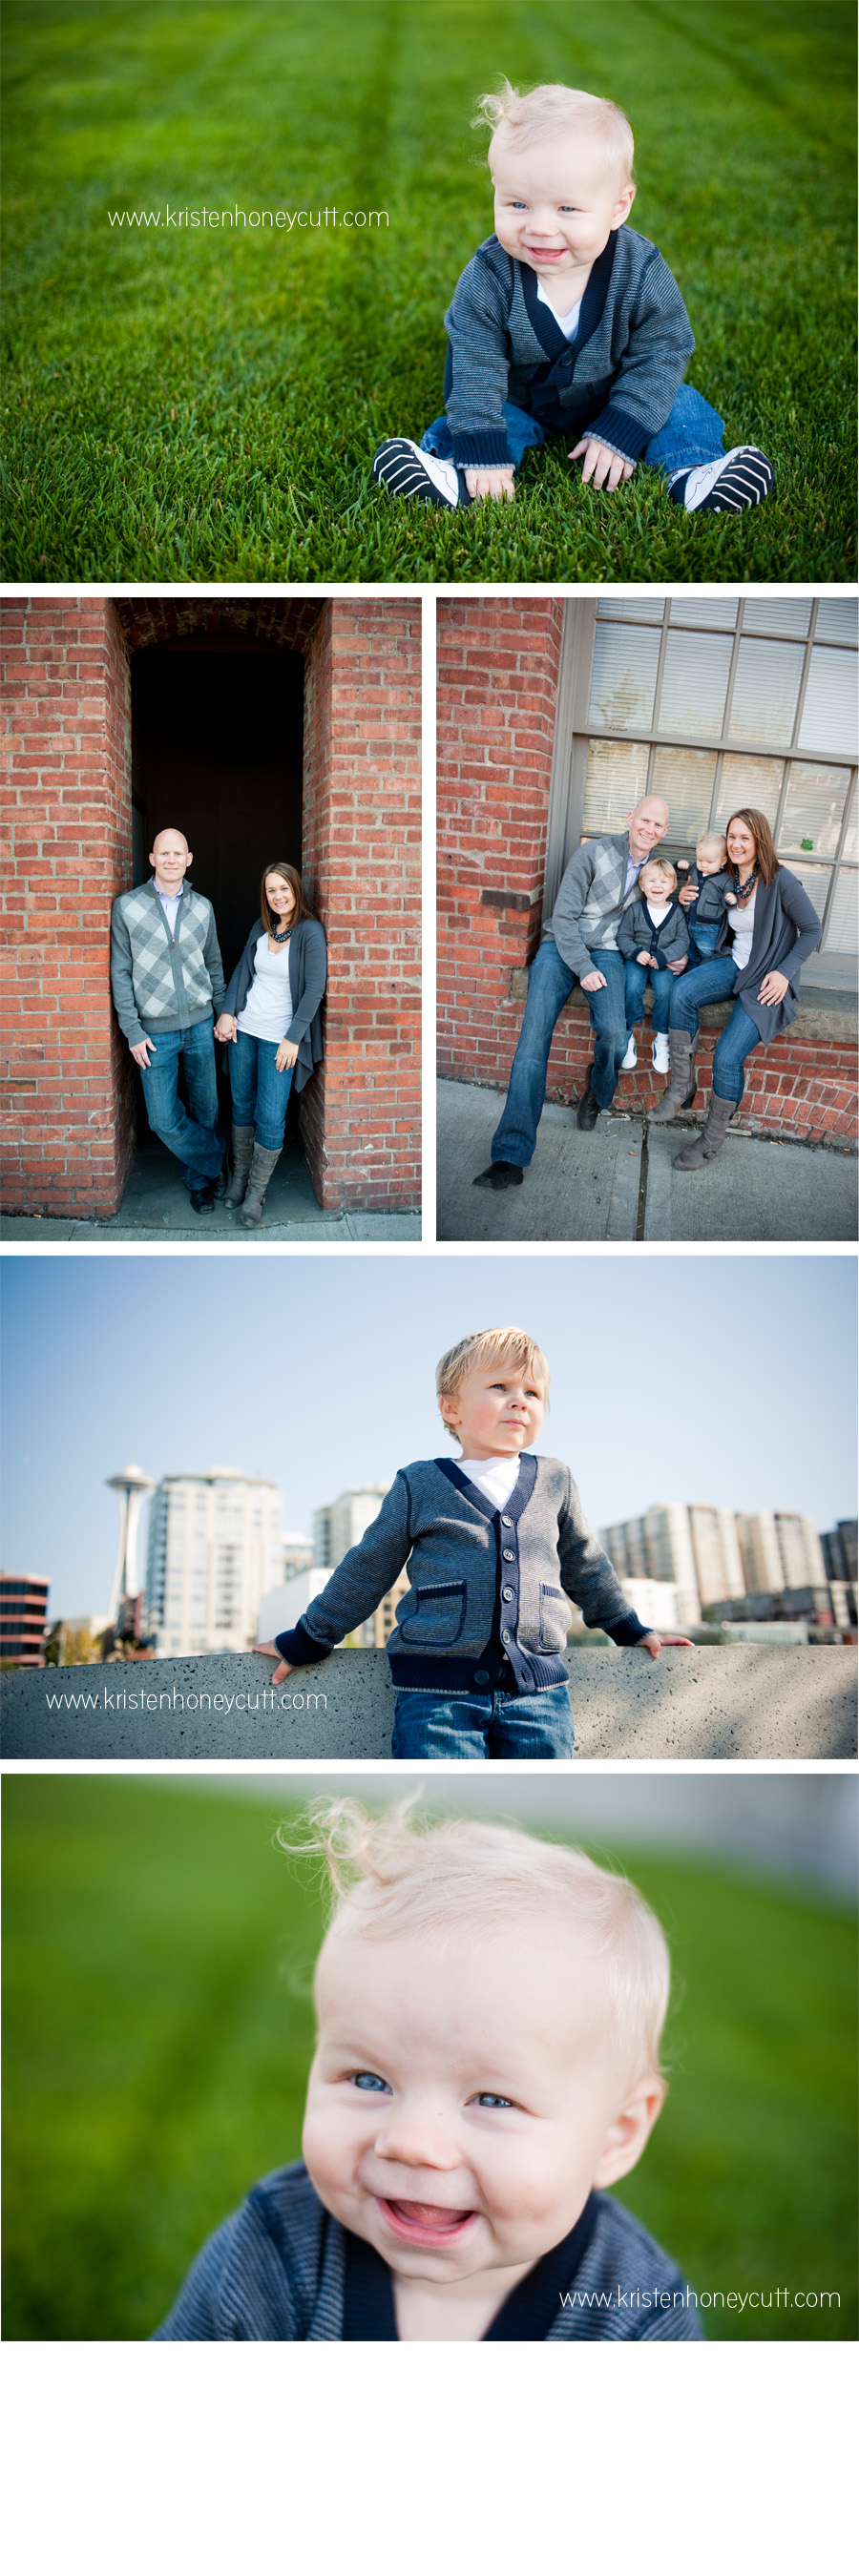 Seattle Photographer Kristen Honeycutt photographs a family of four at the PACCAR Pavilion.